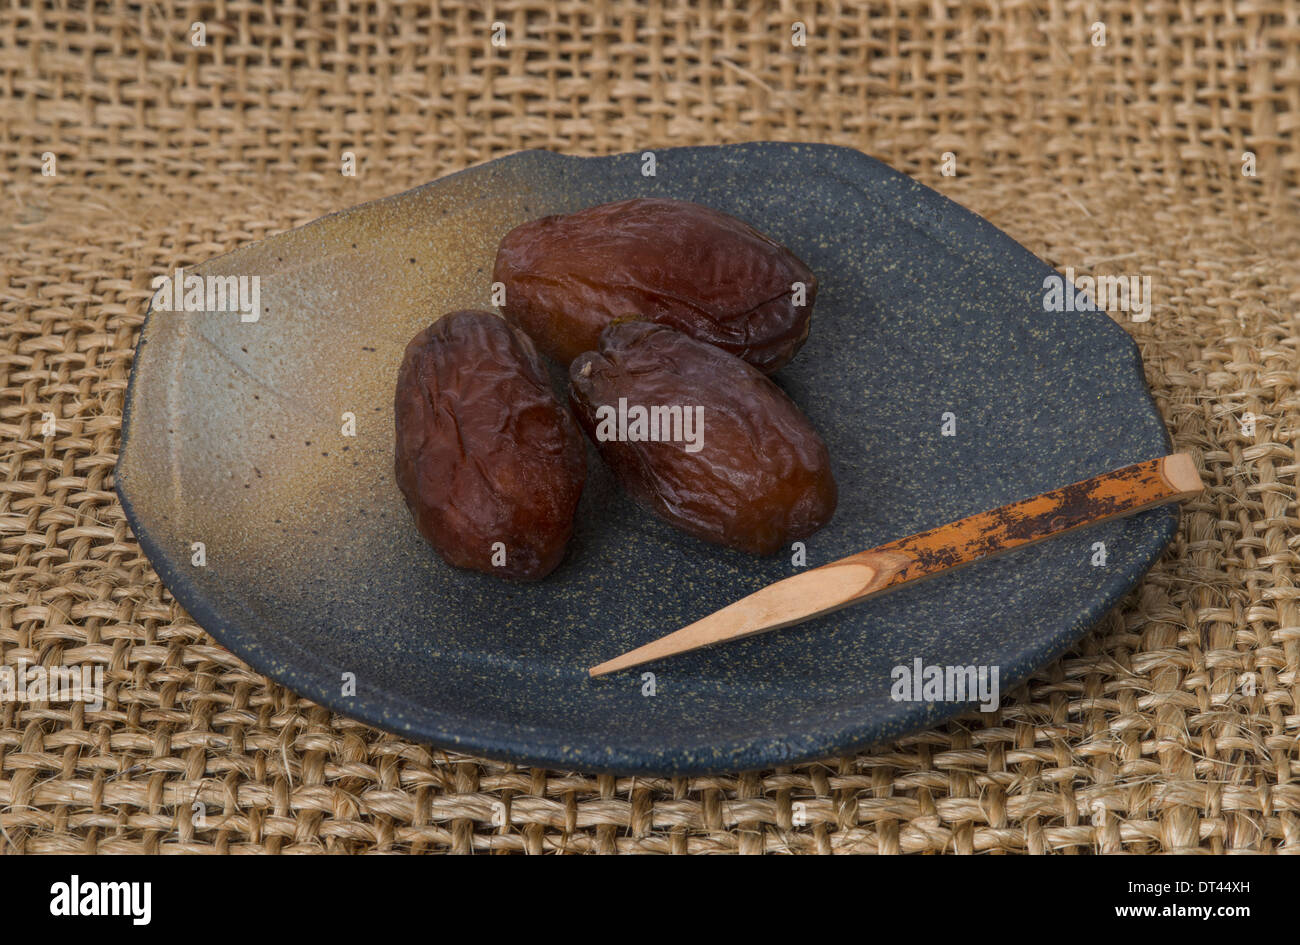 Dates on a ceramic plate and bamboo stick Stock Photo